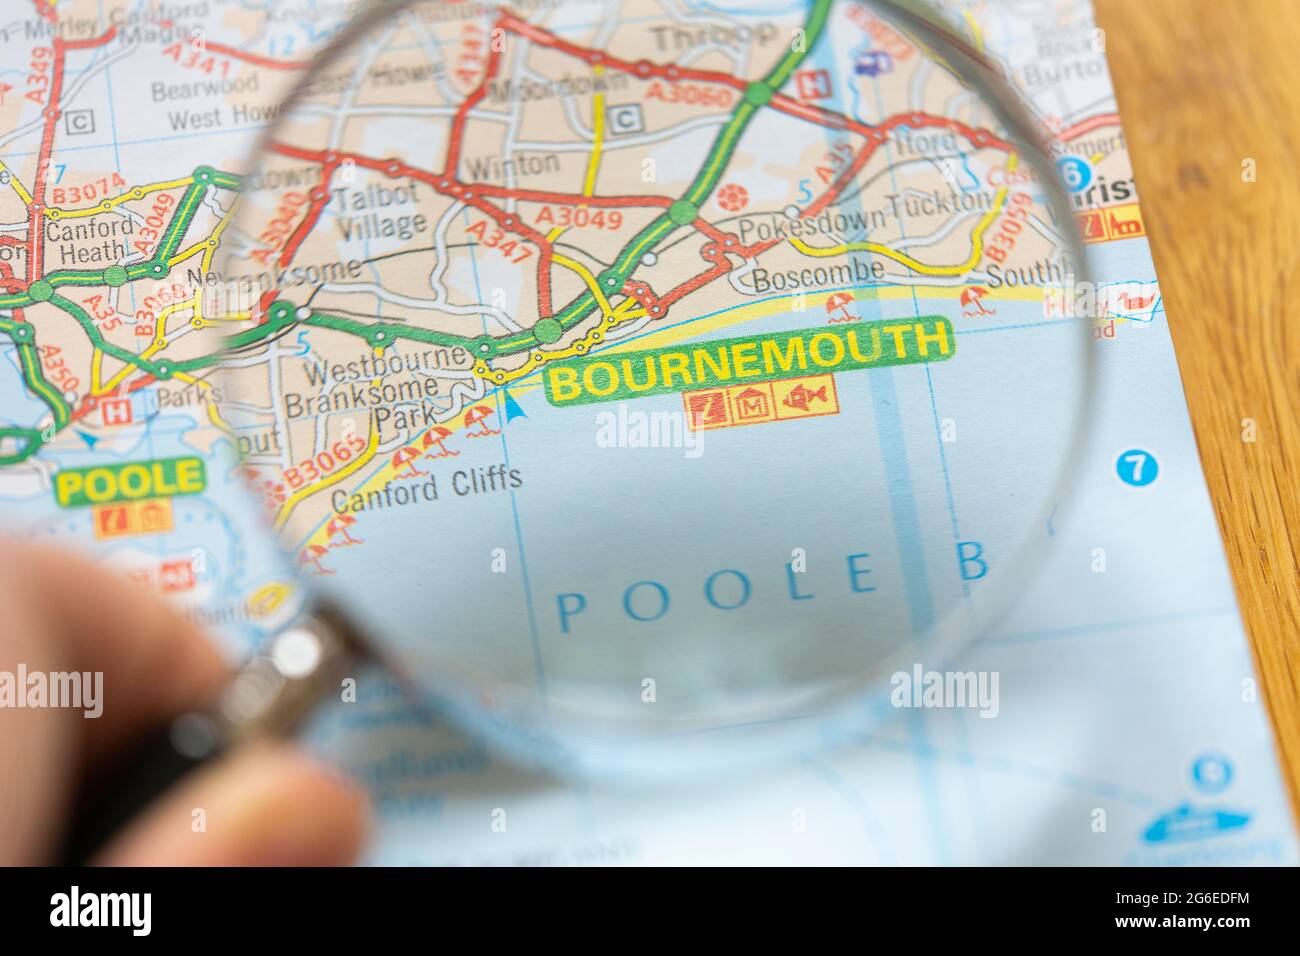 Closeup of a page in a printed road map atlas with a man's hand holding a magnifying glass showing the coastal resort town of Bournemouth in England Stock Photo